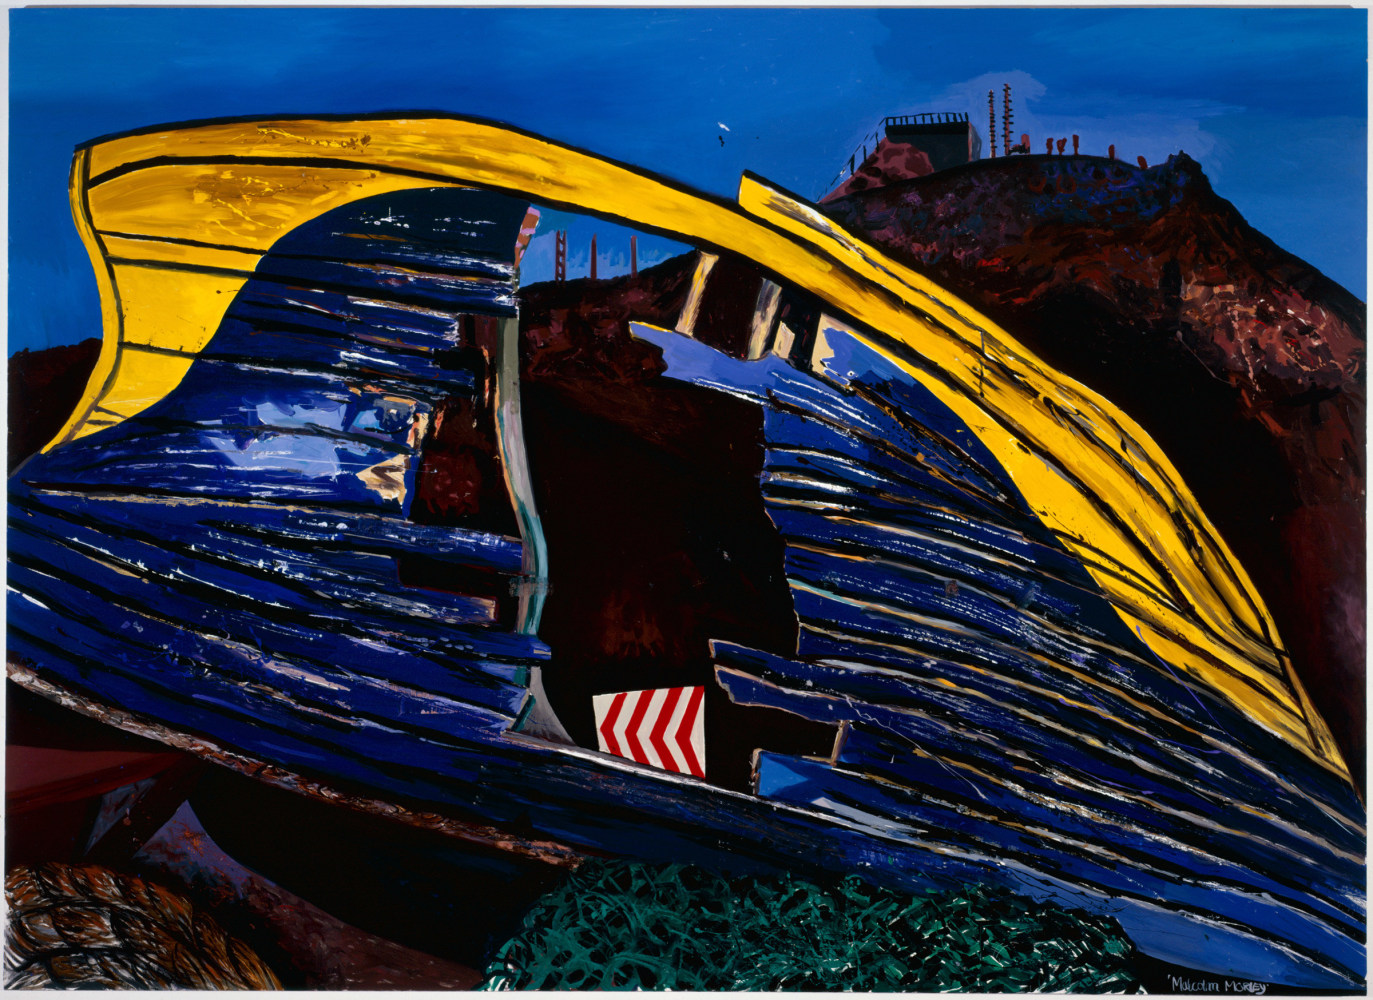 painting of a blue and yellow boat hull damaged and overturned in the foreground and a hill rising in the background